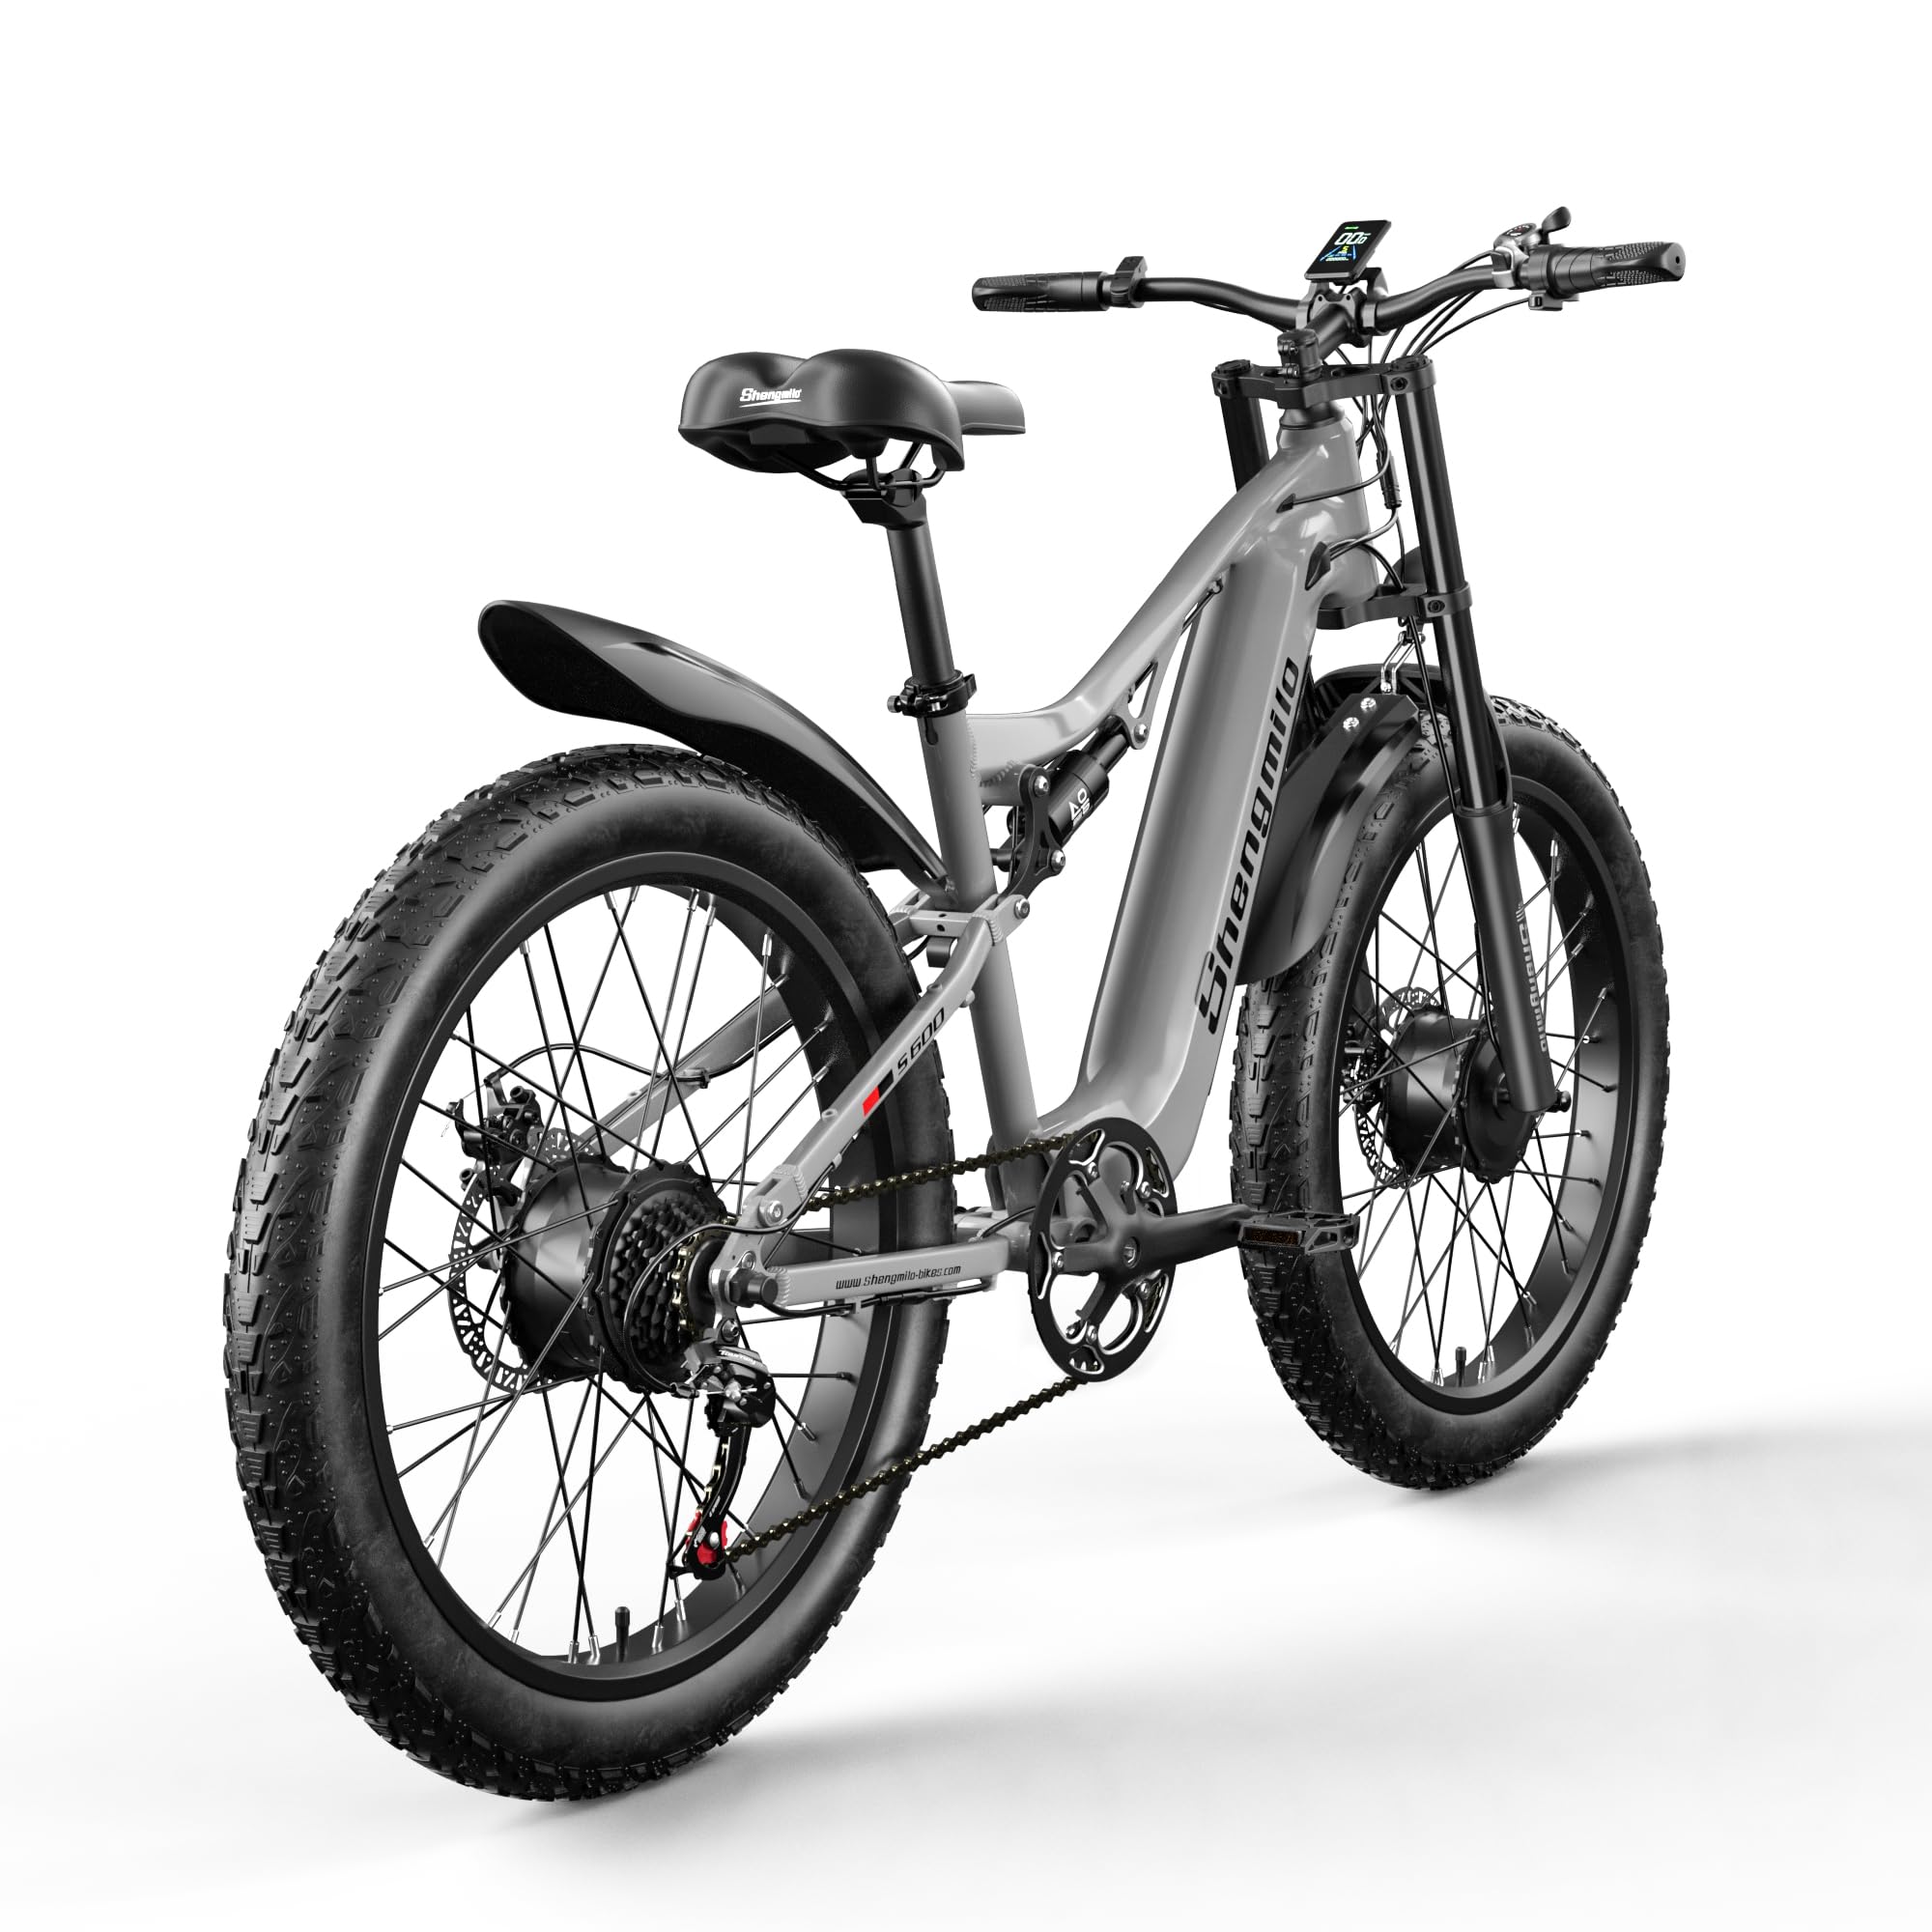 Shengmilo Dual Suspension S600 E-Mountain Bike Dual Motor Electric Motorbike 26Inch Fat Tire Electric Bike 840WH Battery with Removable Li-Ion Battery and 7 Speed Gear for Adults-Men(UK Warehouse)